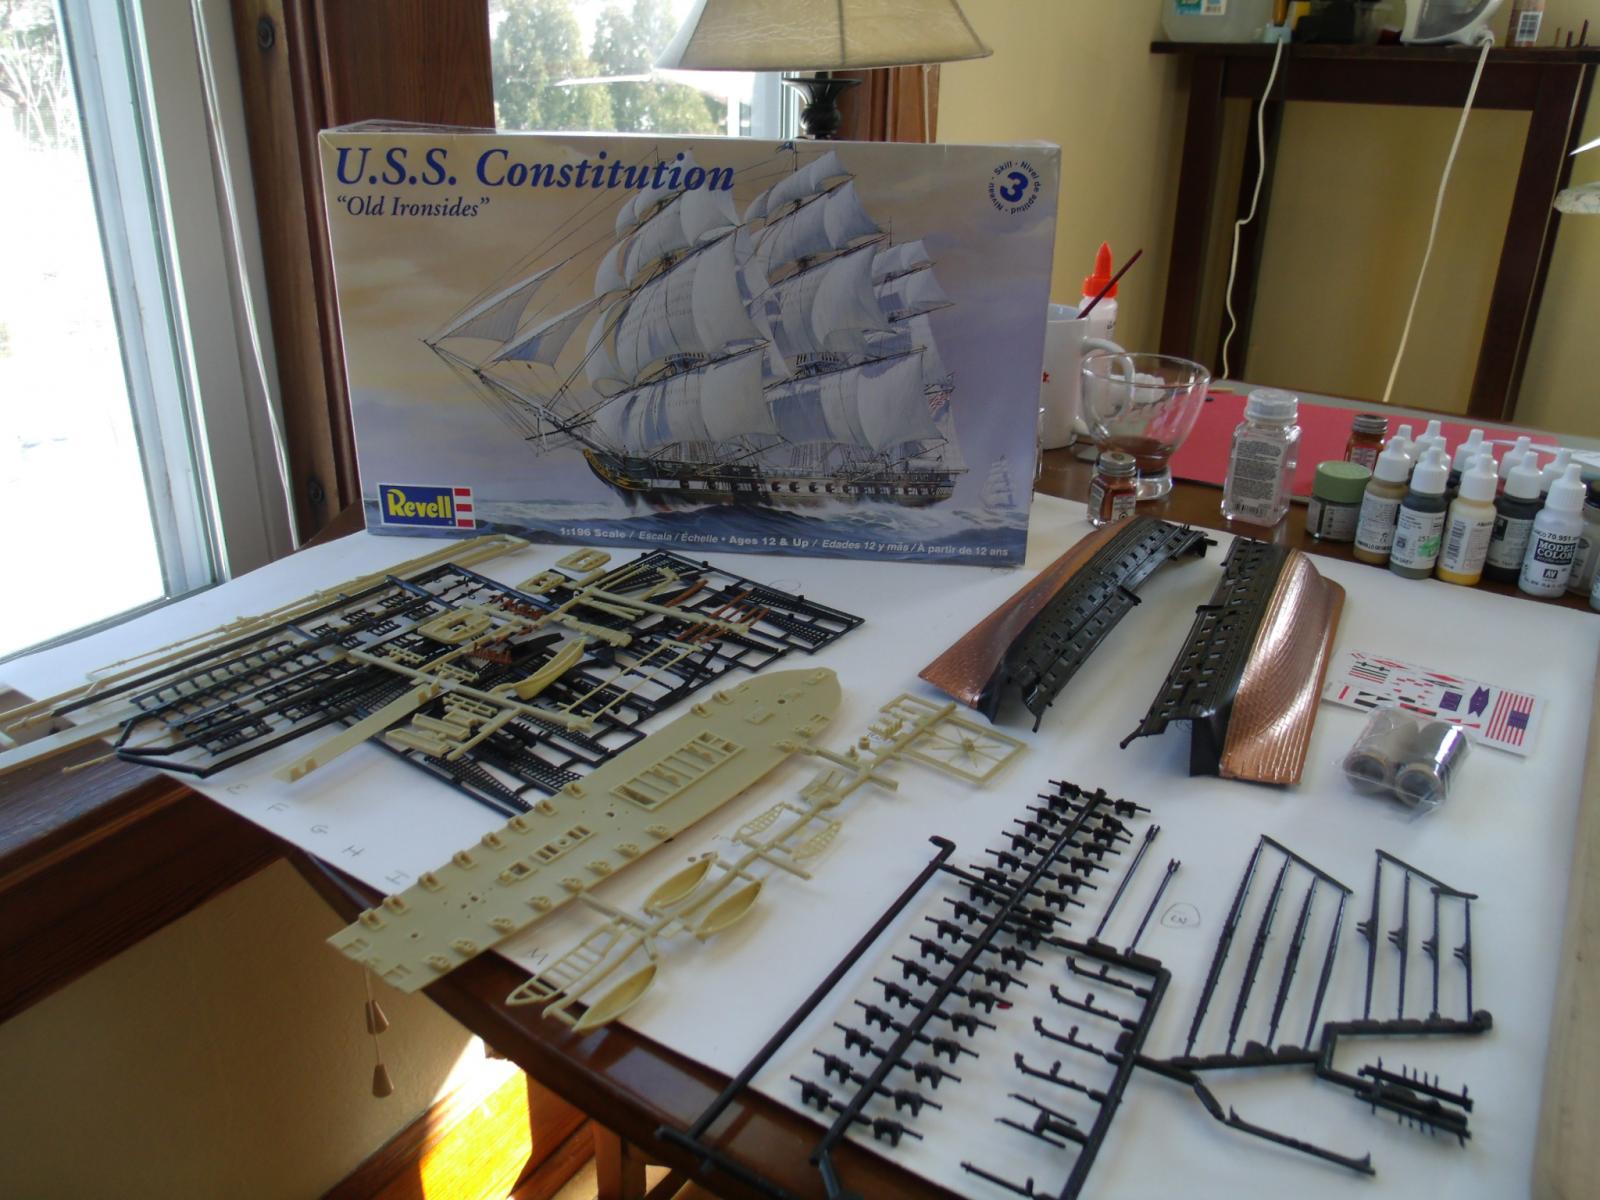 Uss Constitution By Kimberley Revell Plastic 1 196 Kit Build Logs For Subjects Built From 1751 1800 Model Ship World